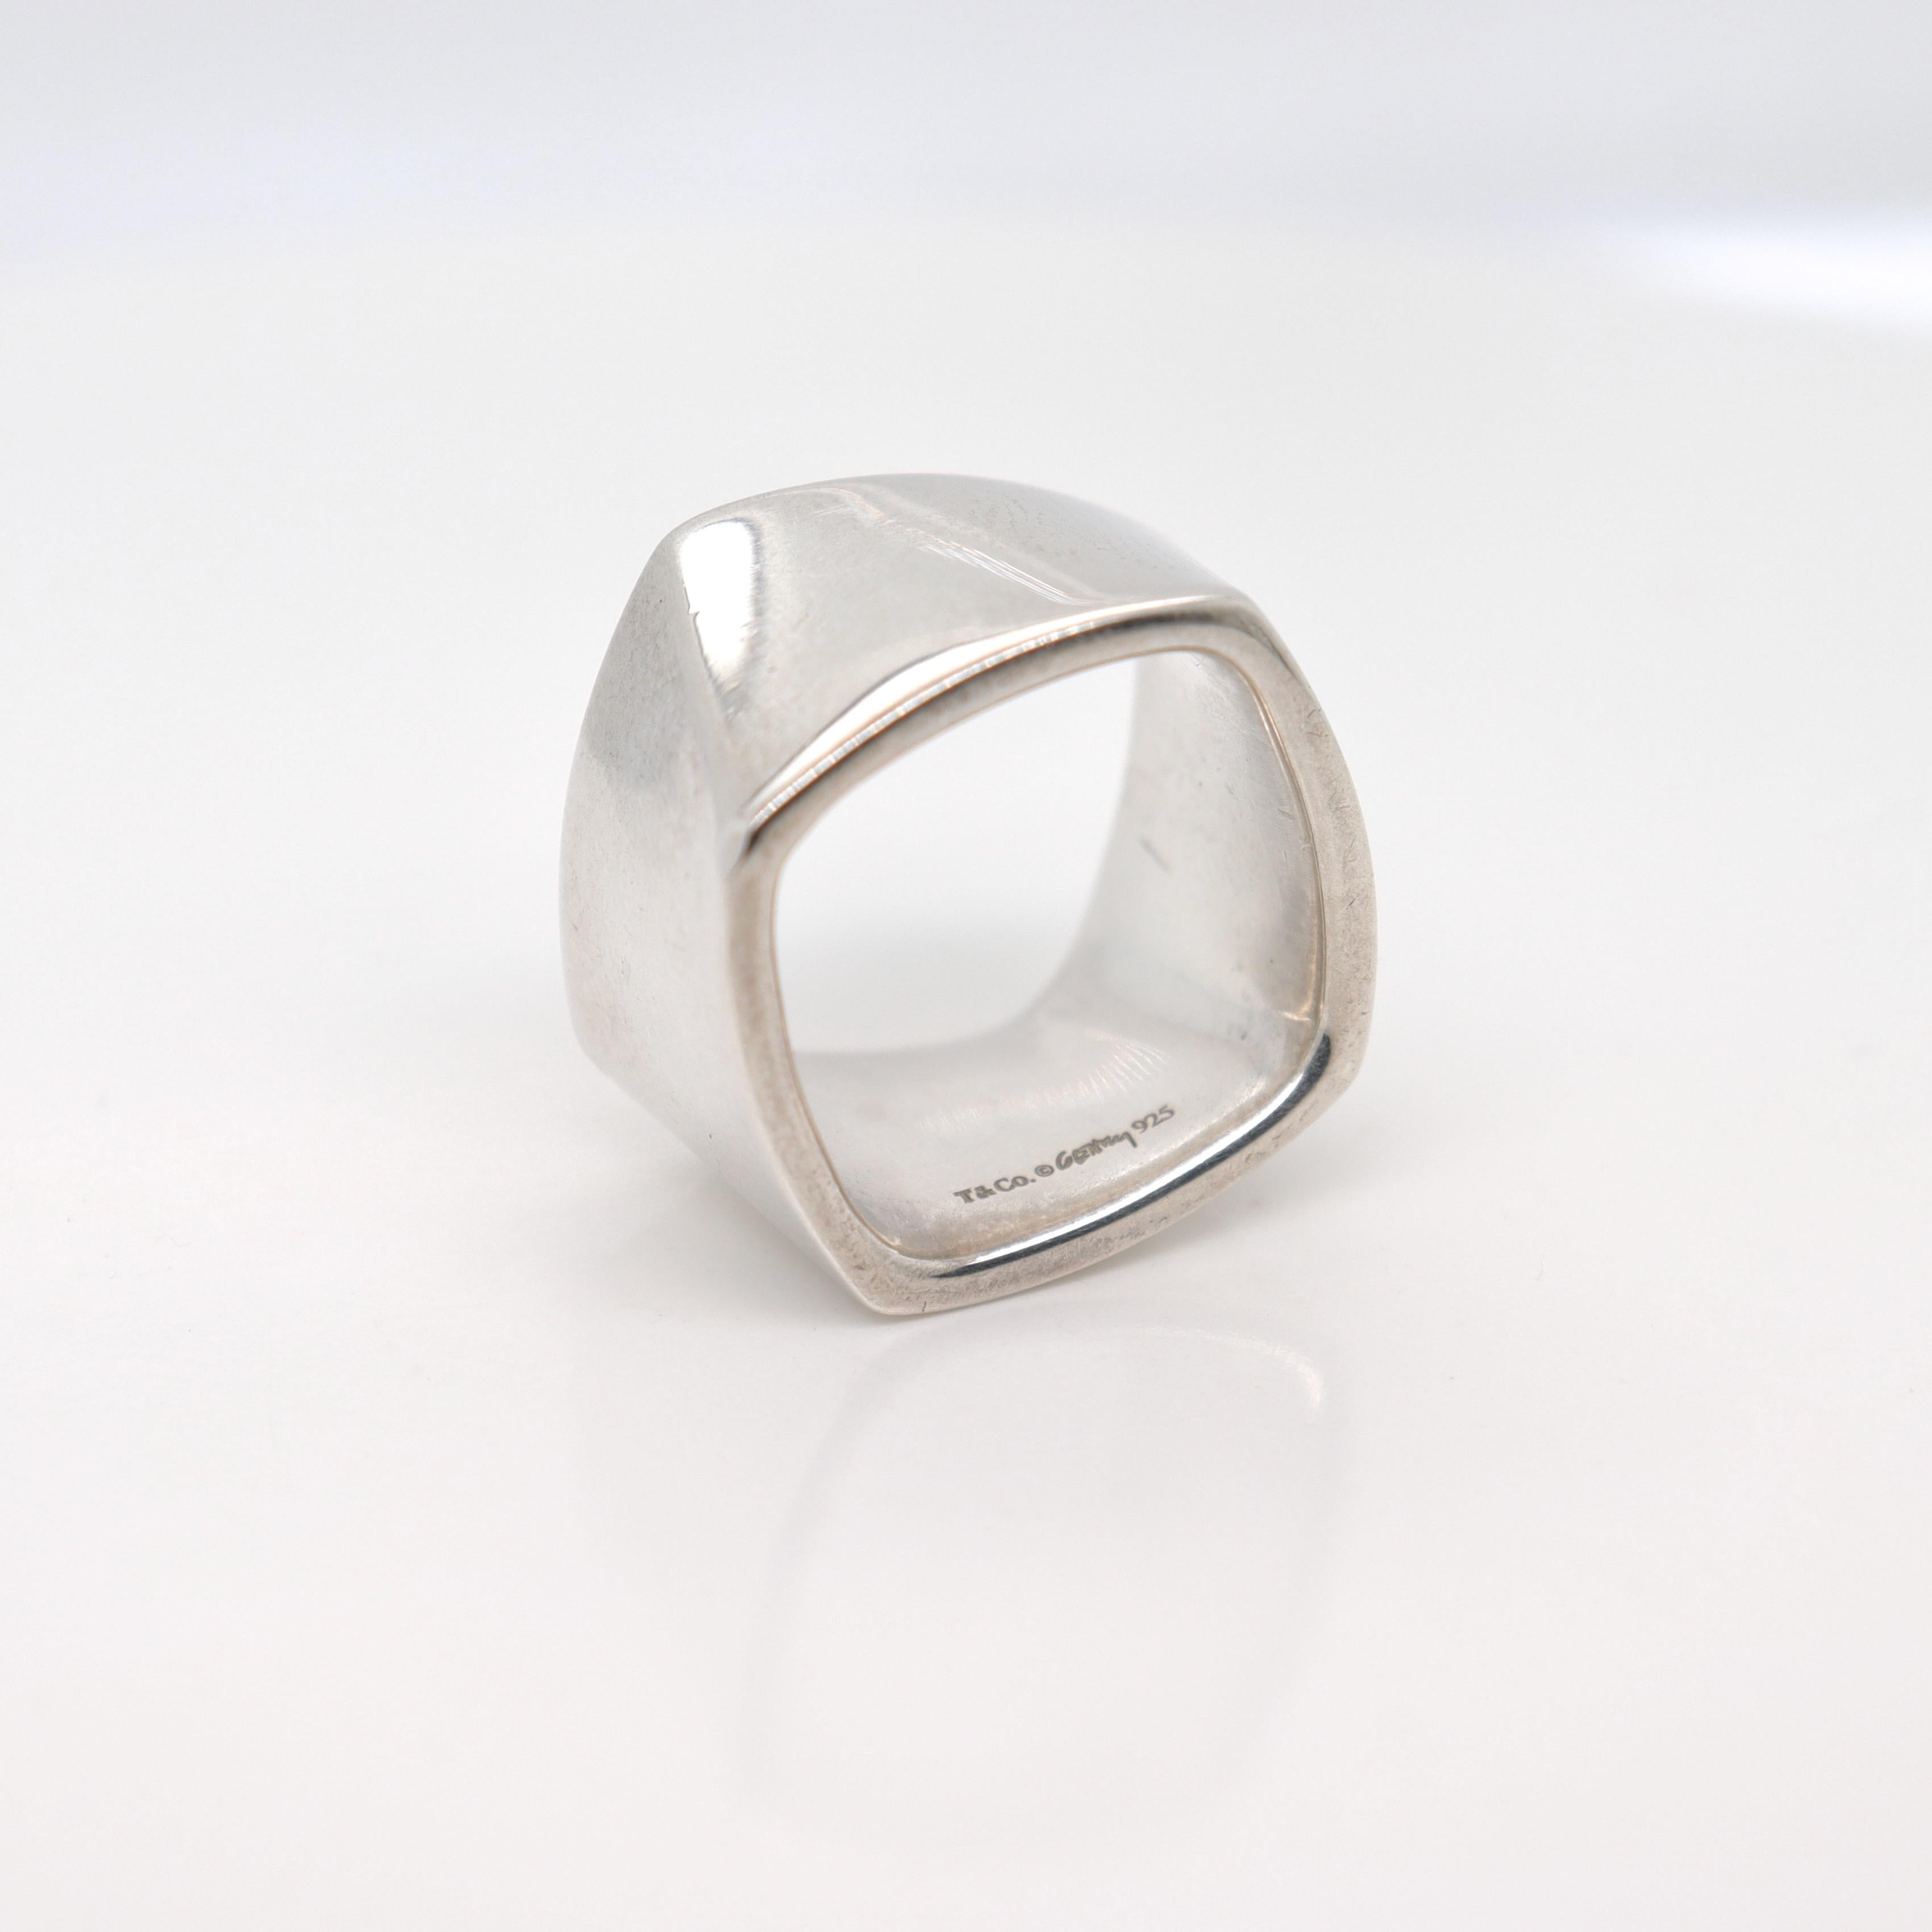 A fine Torque wide band silver ring.

In sterling silver.

Designed by Frank Gehry for Tiffany & Co.

Simply a wonderful ring!

Date:
20th Century

Overall Condition:
It is in overall good, as-pictured, used estate condition with some fine & light